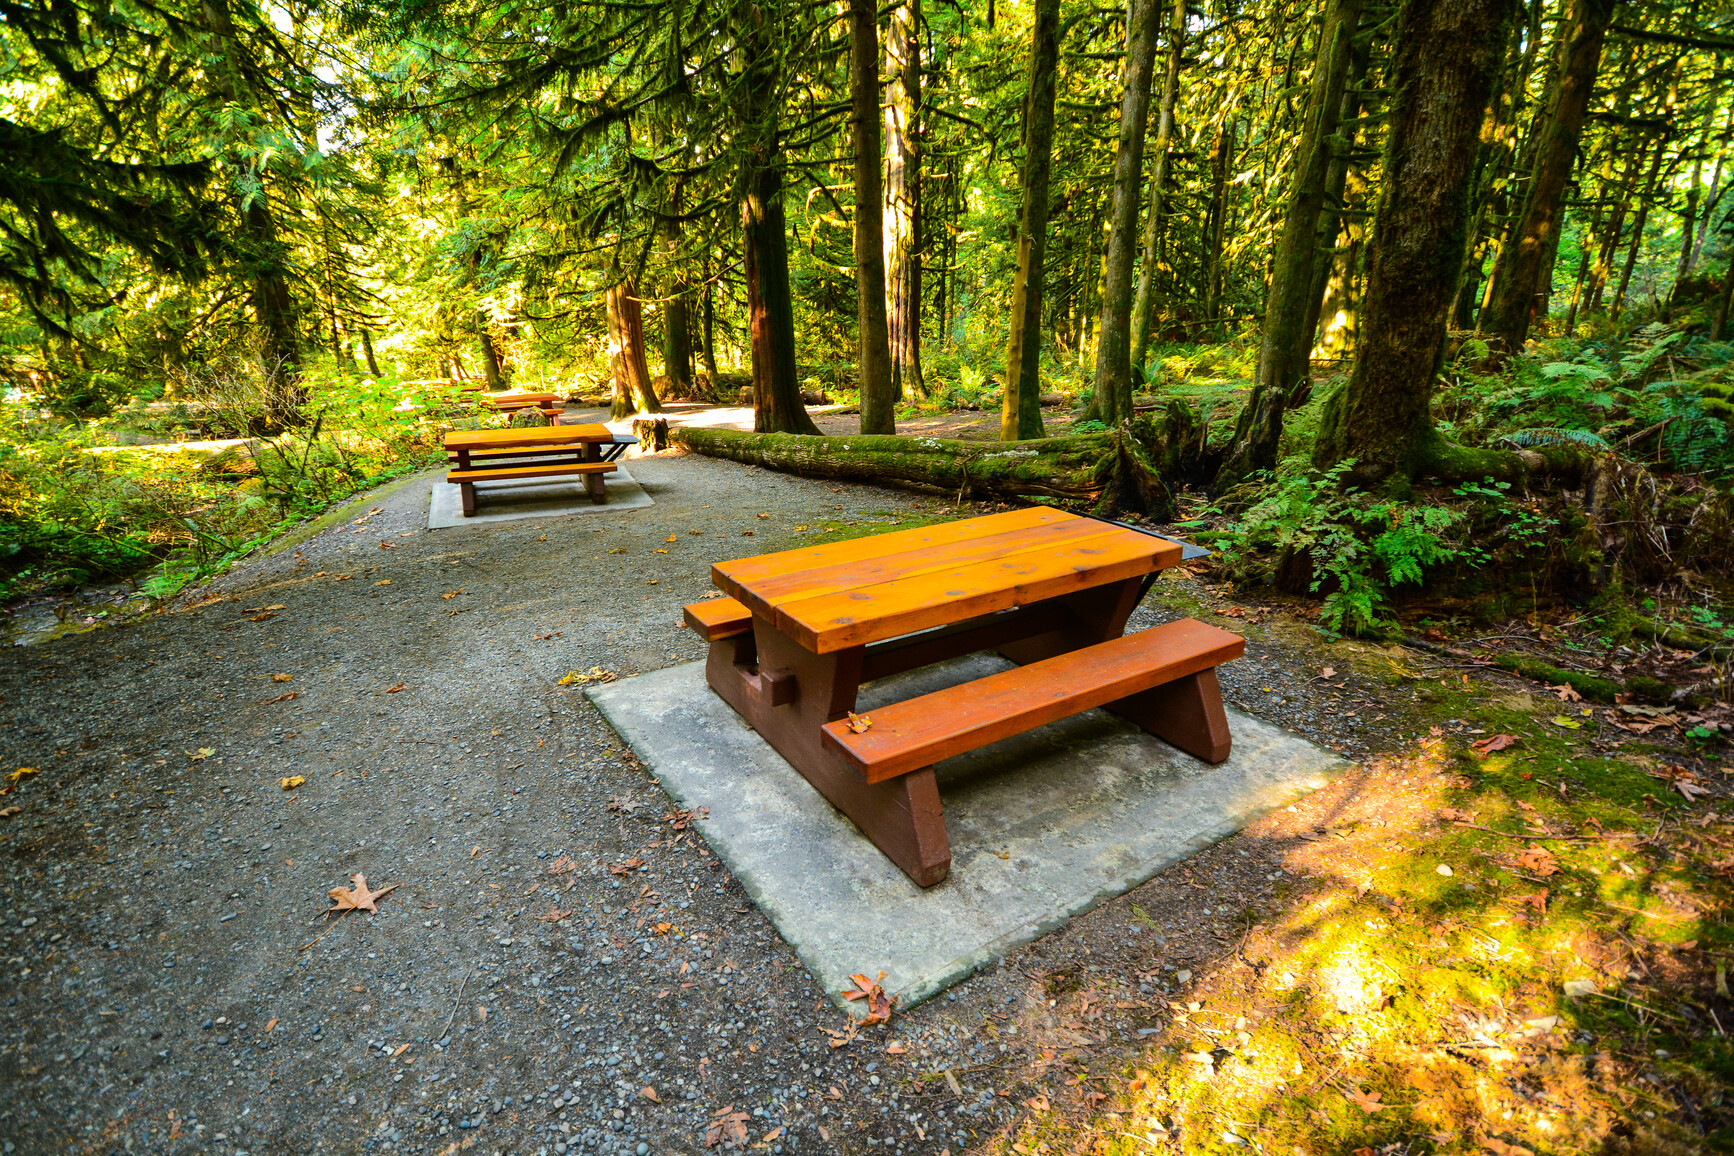 Shady picnic area in the forest.